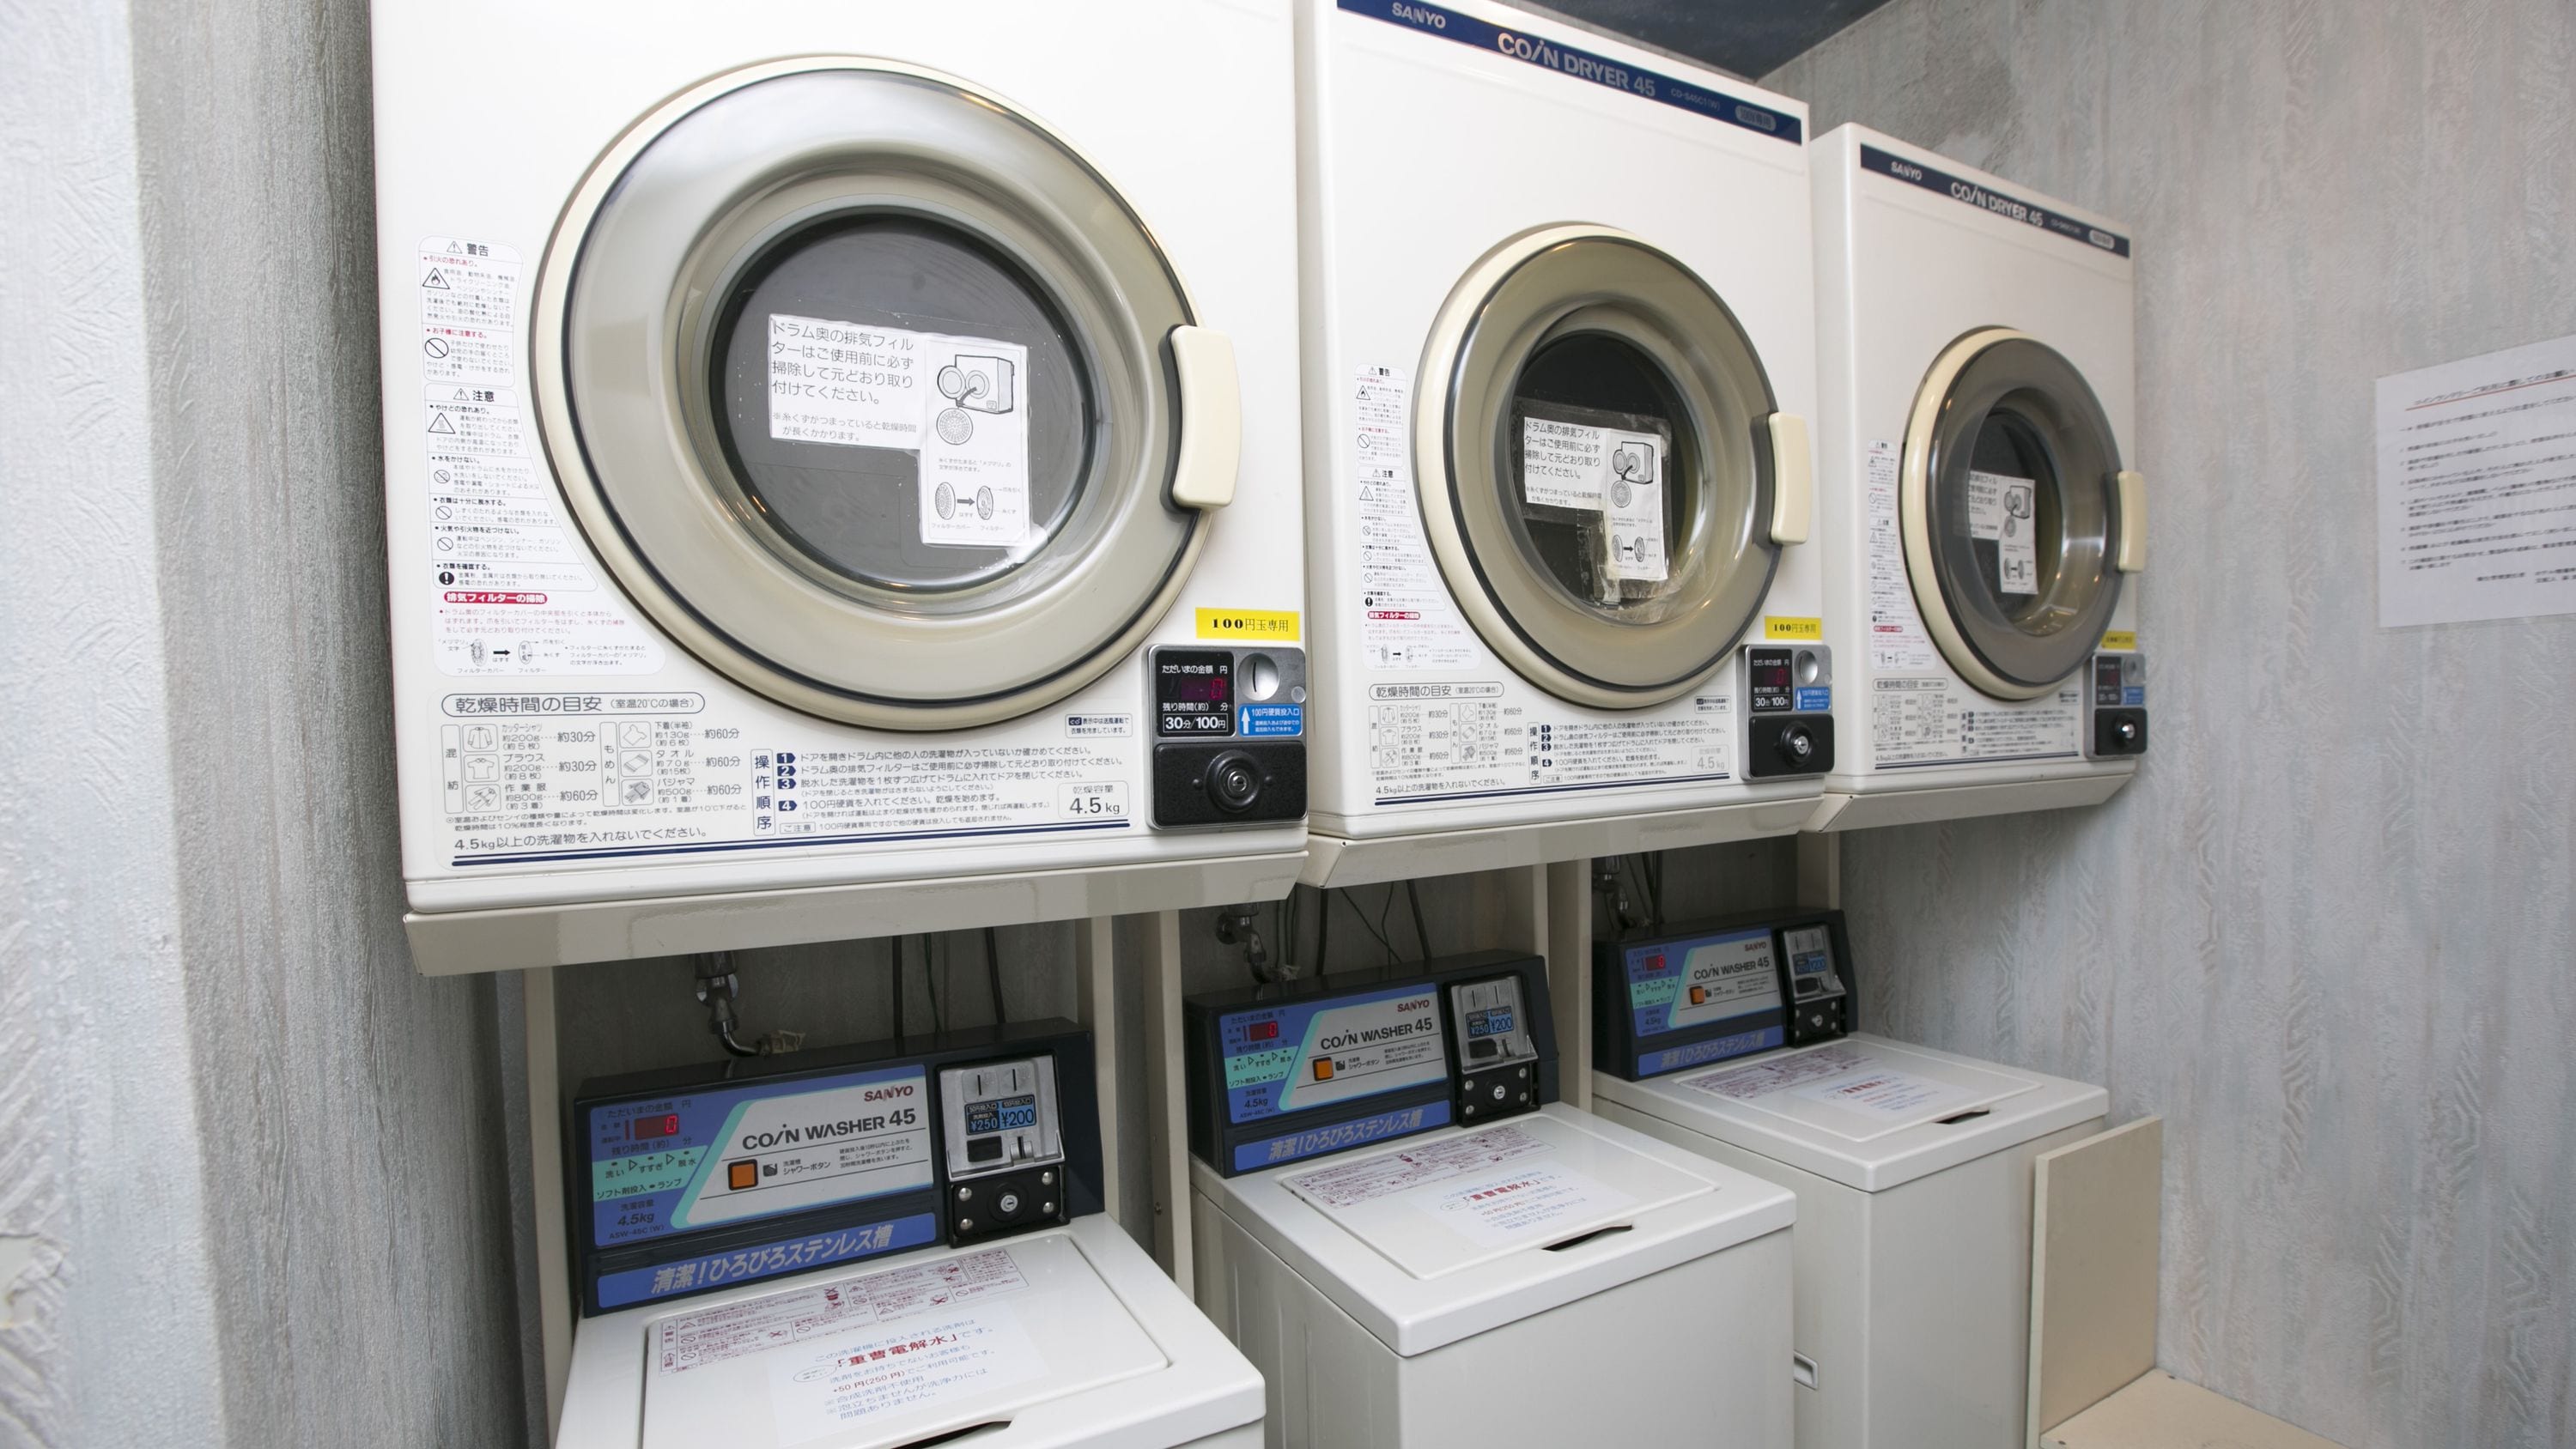 It is a strong ally for coin laundry / business, sports competitions, and long-term stays.